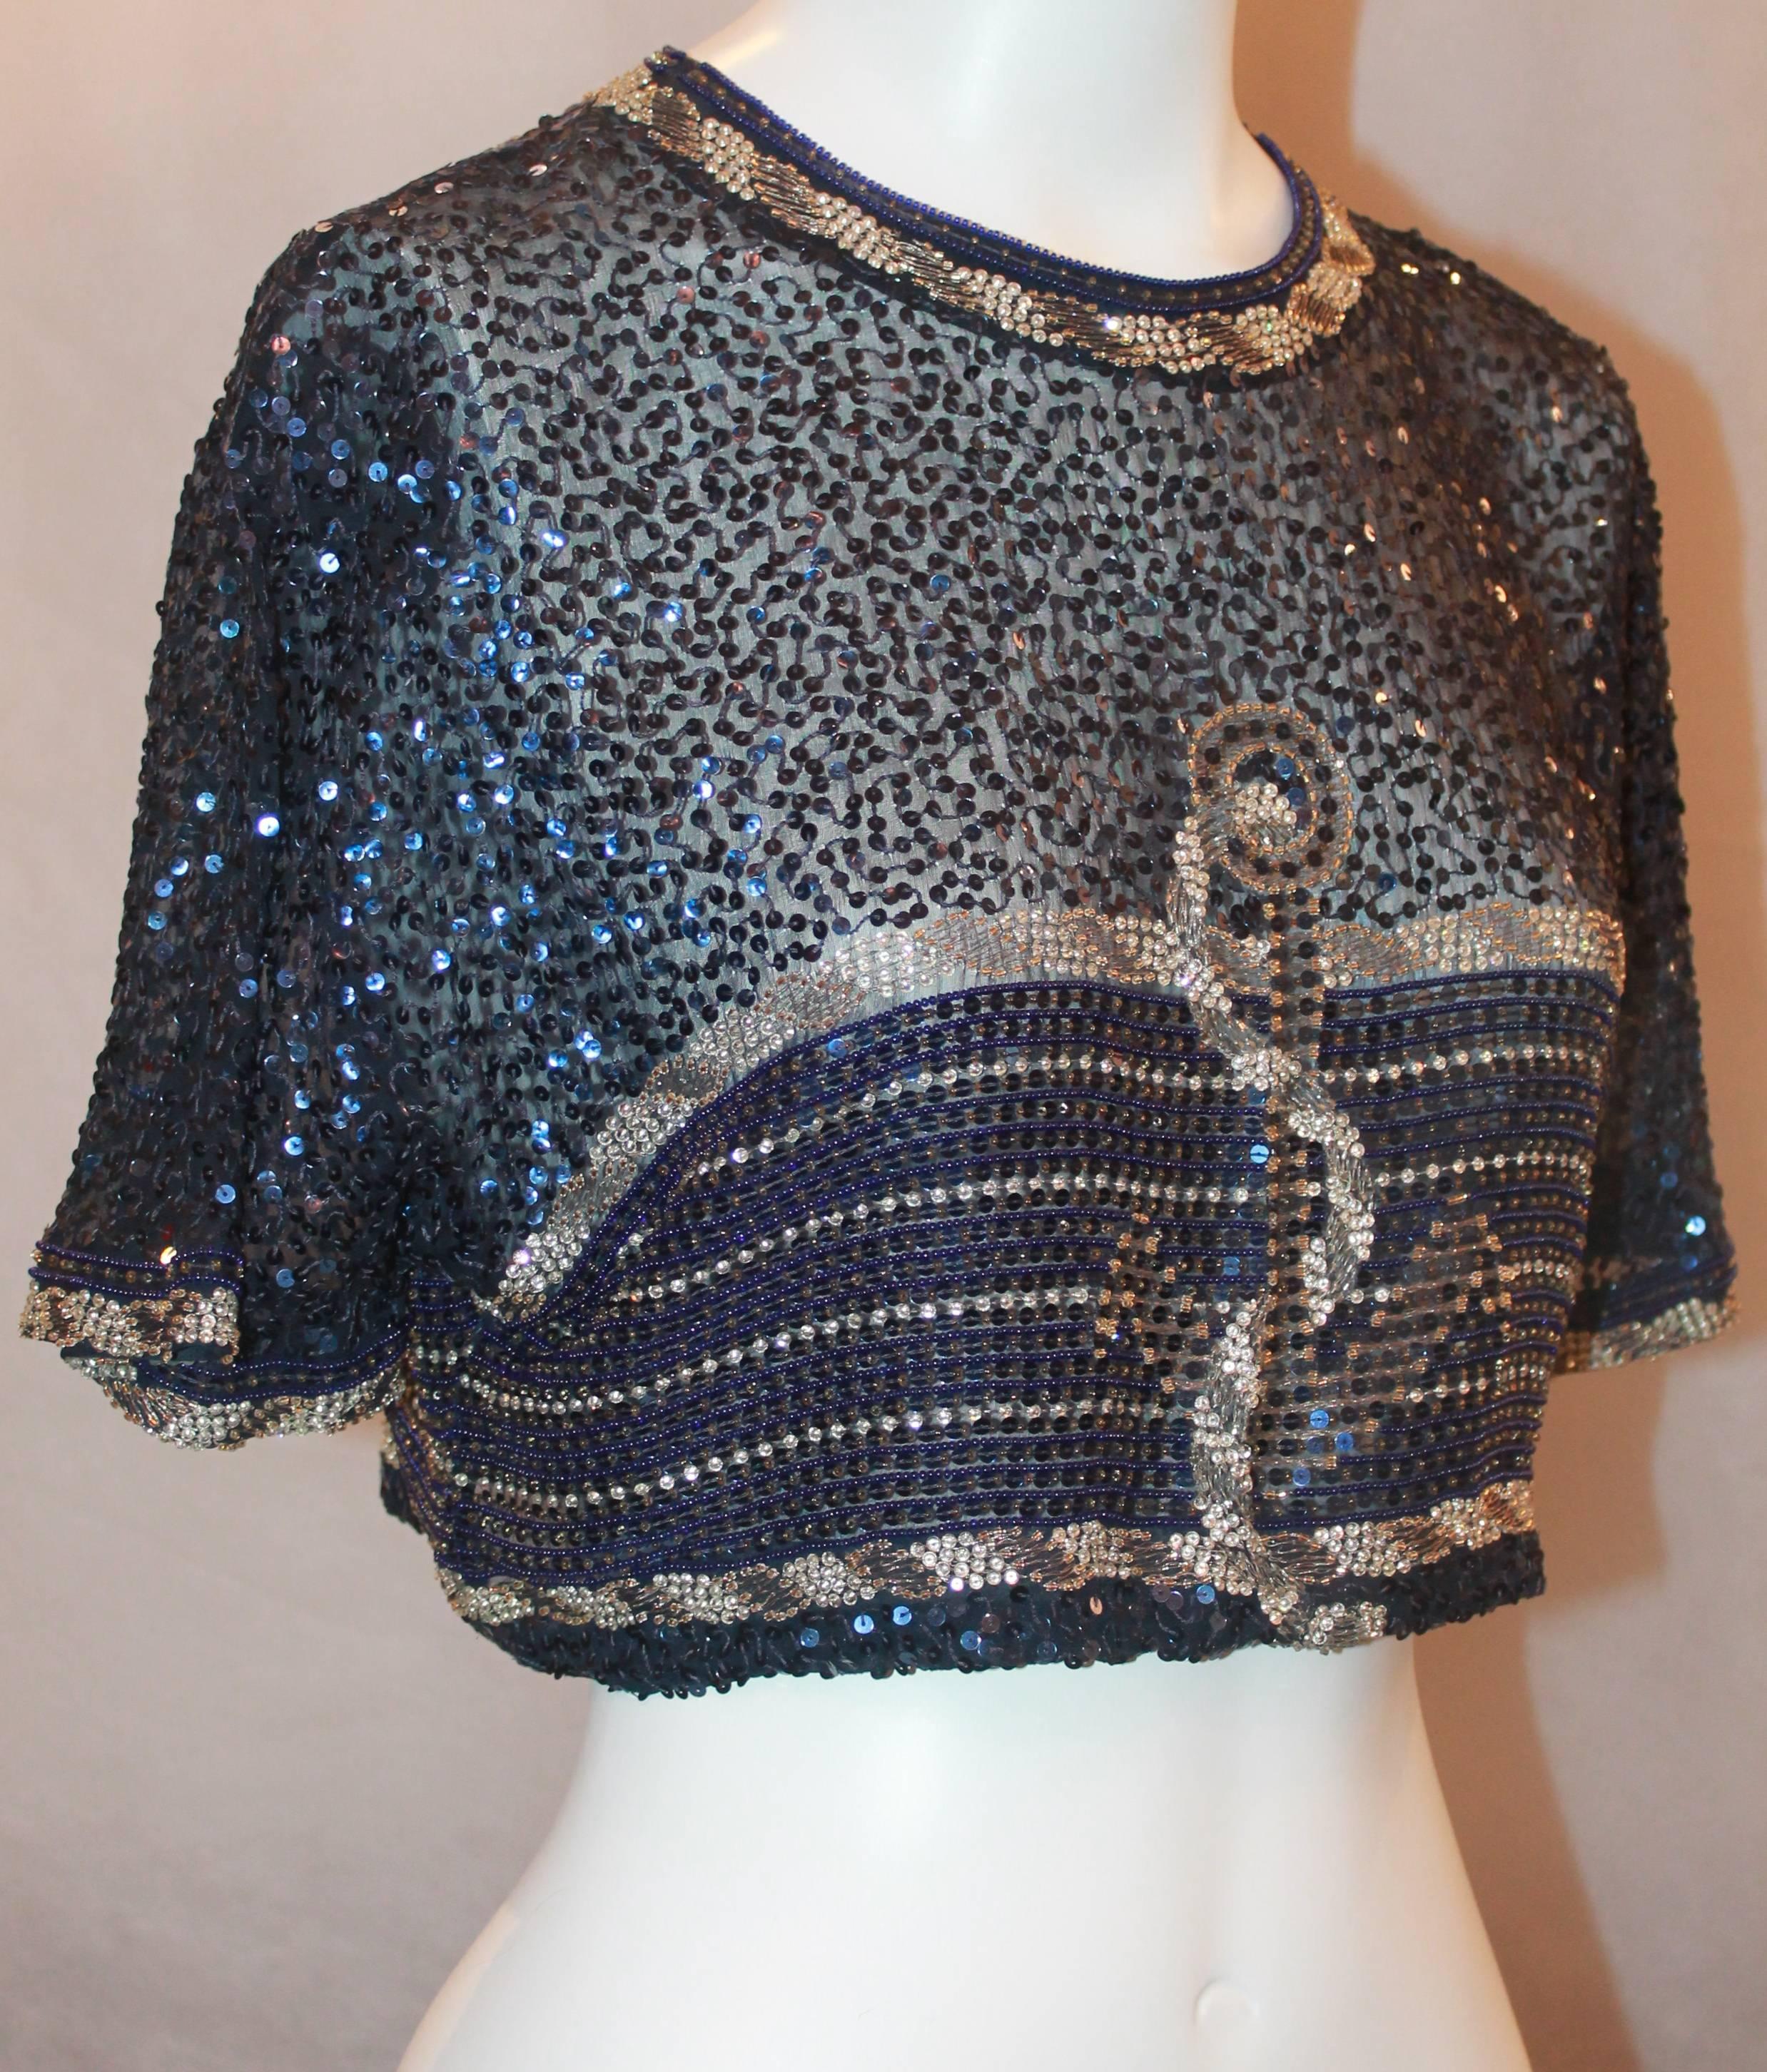 Vintage Unknown Navy and Gold, Bead and Sequin Anchor Design Short Sleeve Crop Top - S.  This gorgeous crop top is in excellent condition.  It features a charming anchor design with bugle beads, silver sequins, and gold threads and beads.  It also